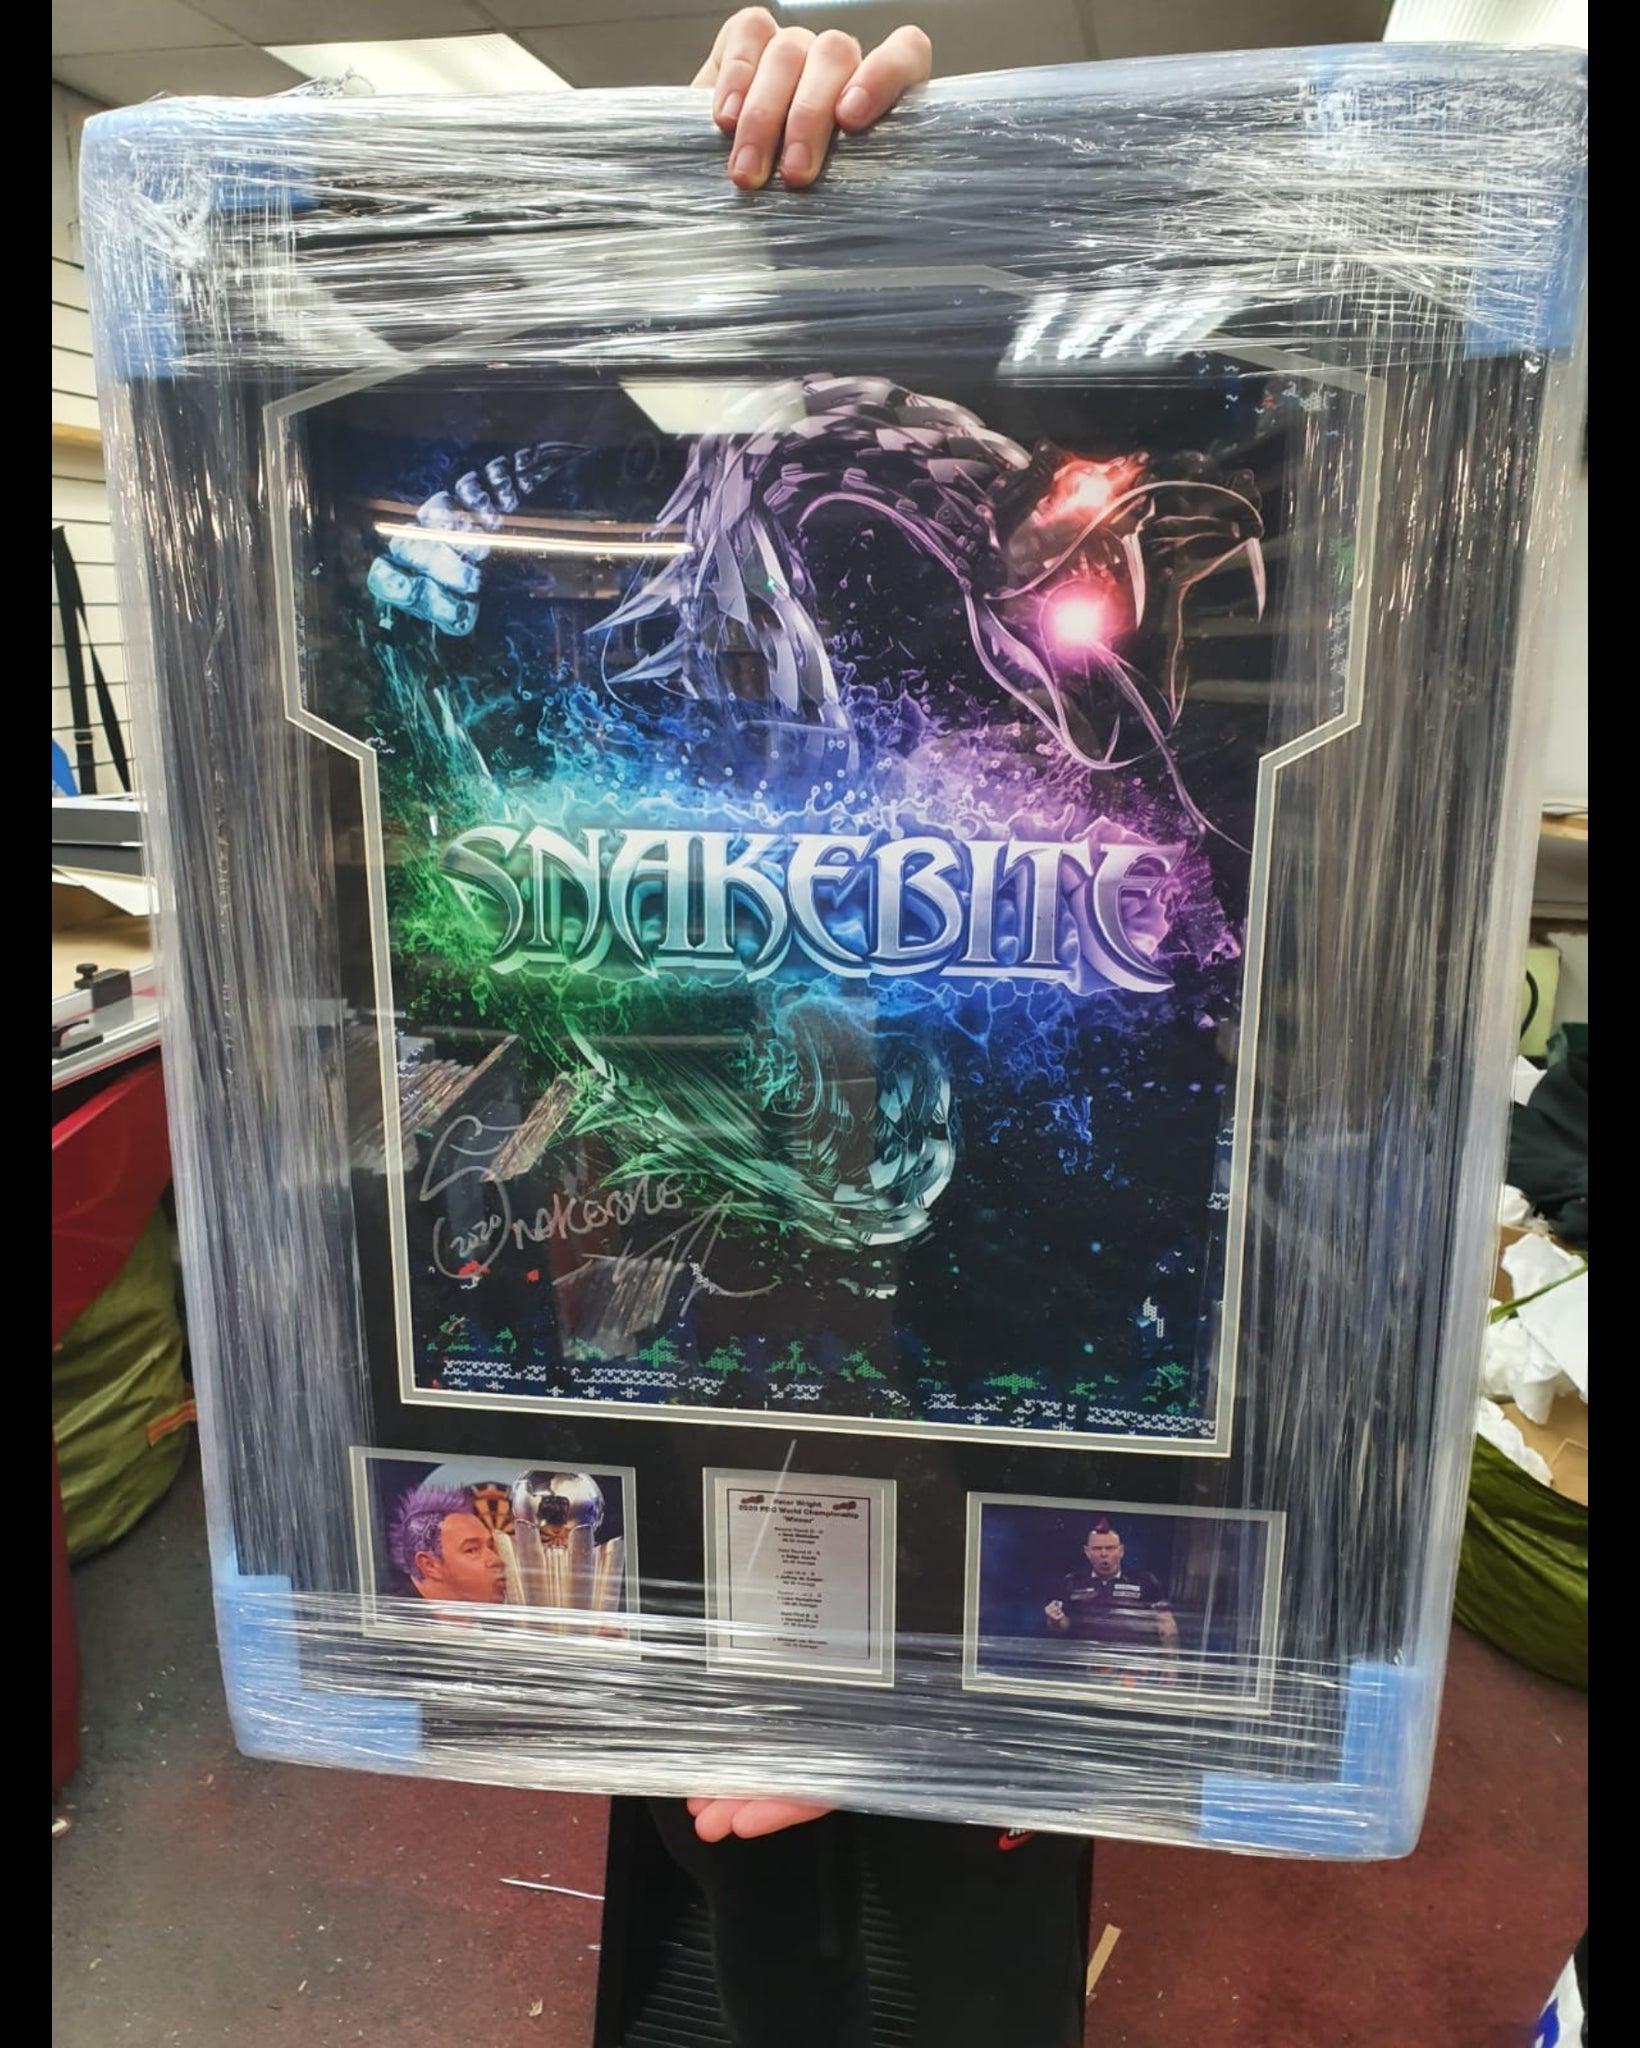 All shirts come Framed Limited edition snakebite playing shirts